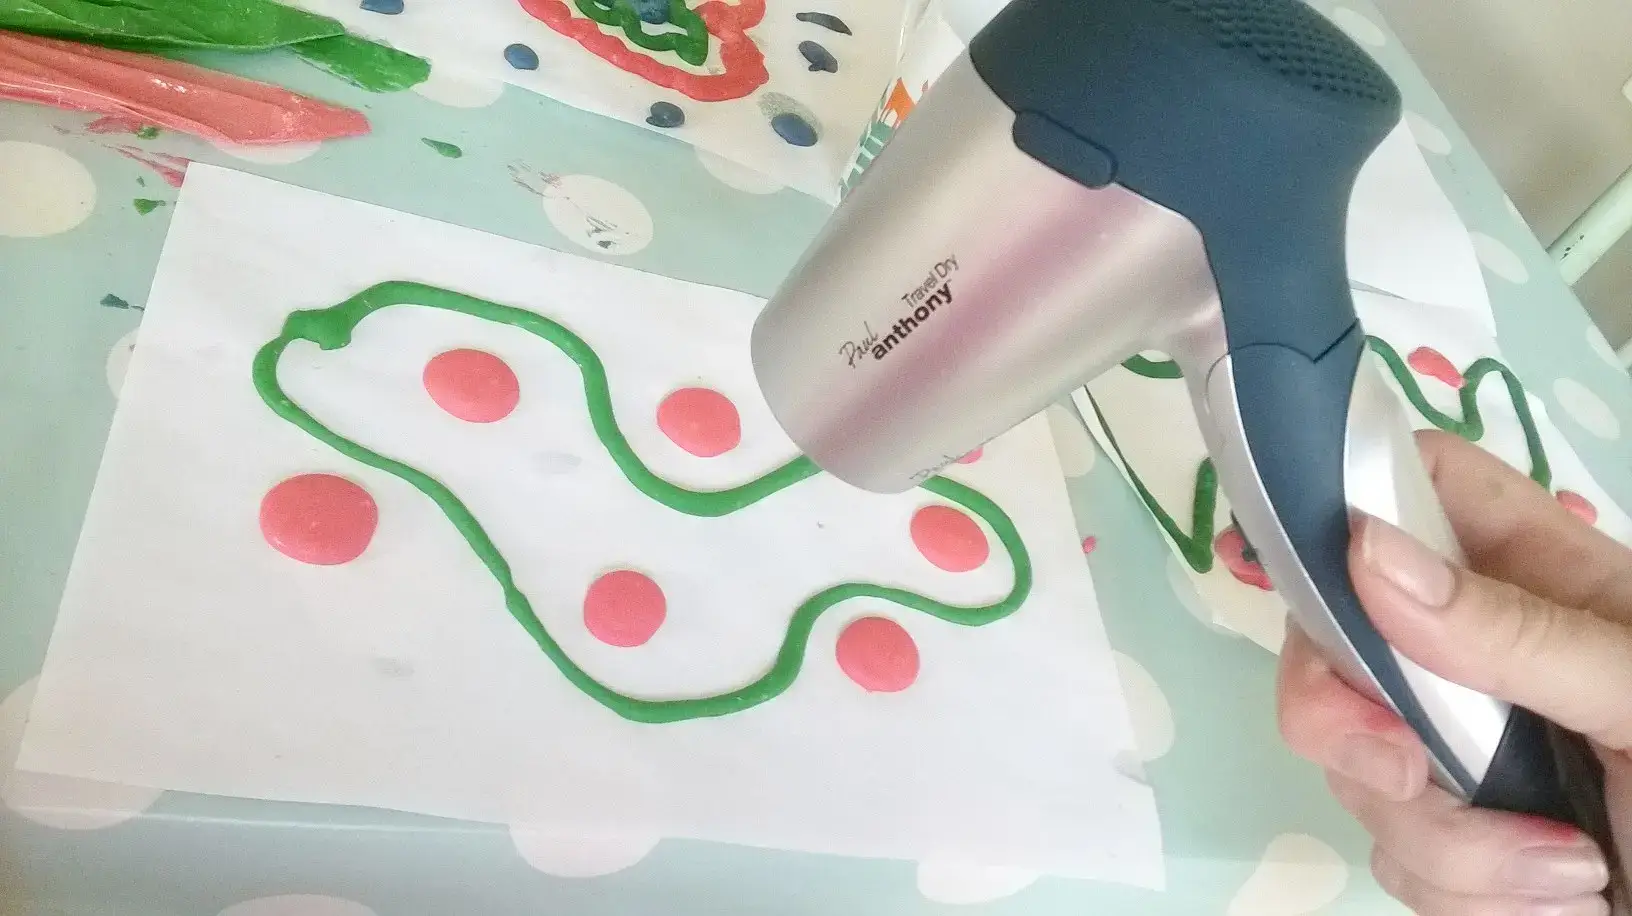 Using a hairdryer to speed dry puffy paint on paper.